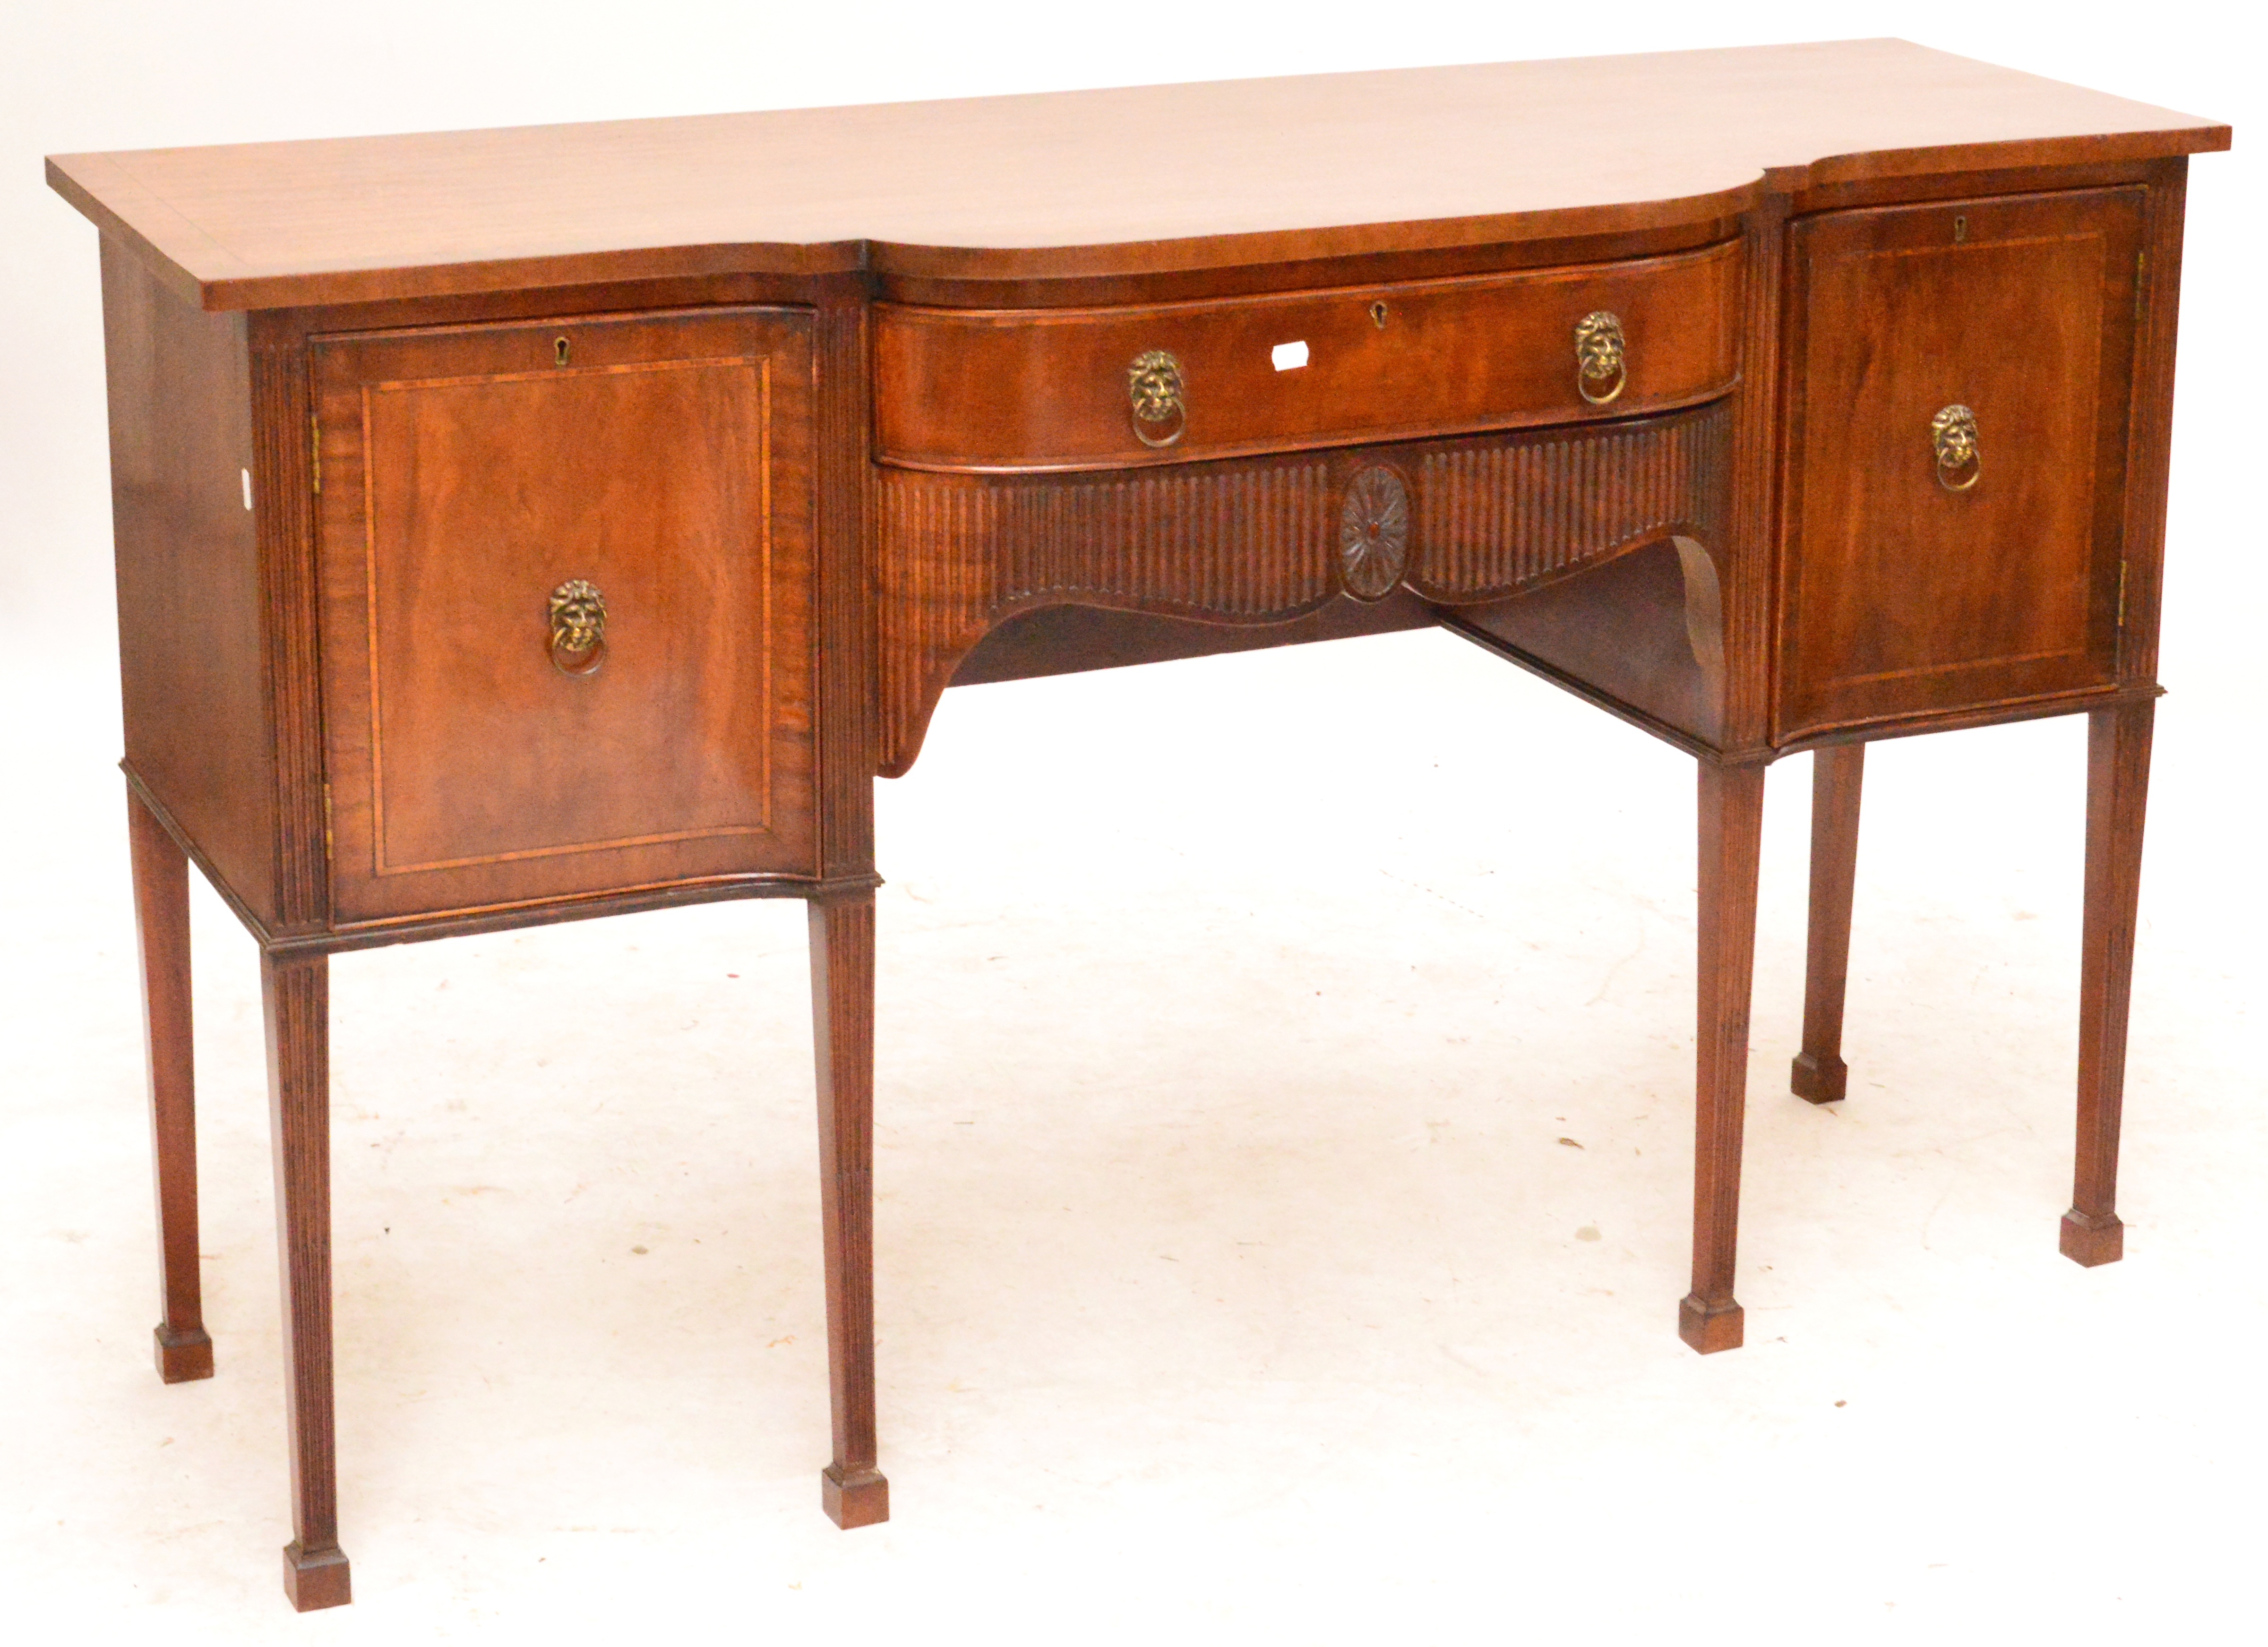 An Edwardian mahogany crossbanded breakfront sideboard with lion mask ring handles, the central